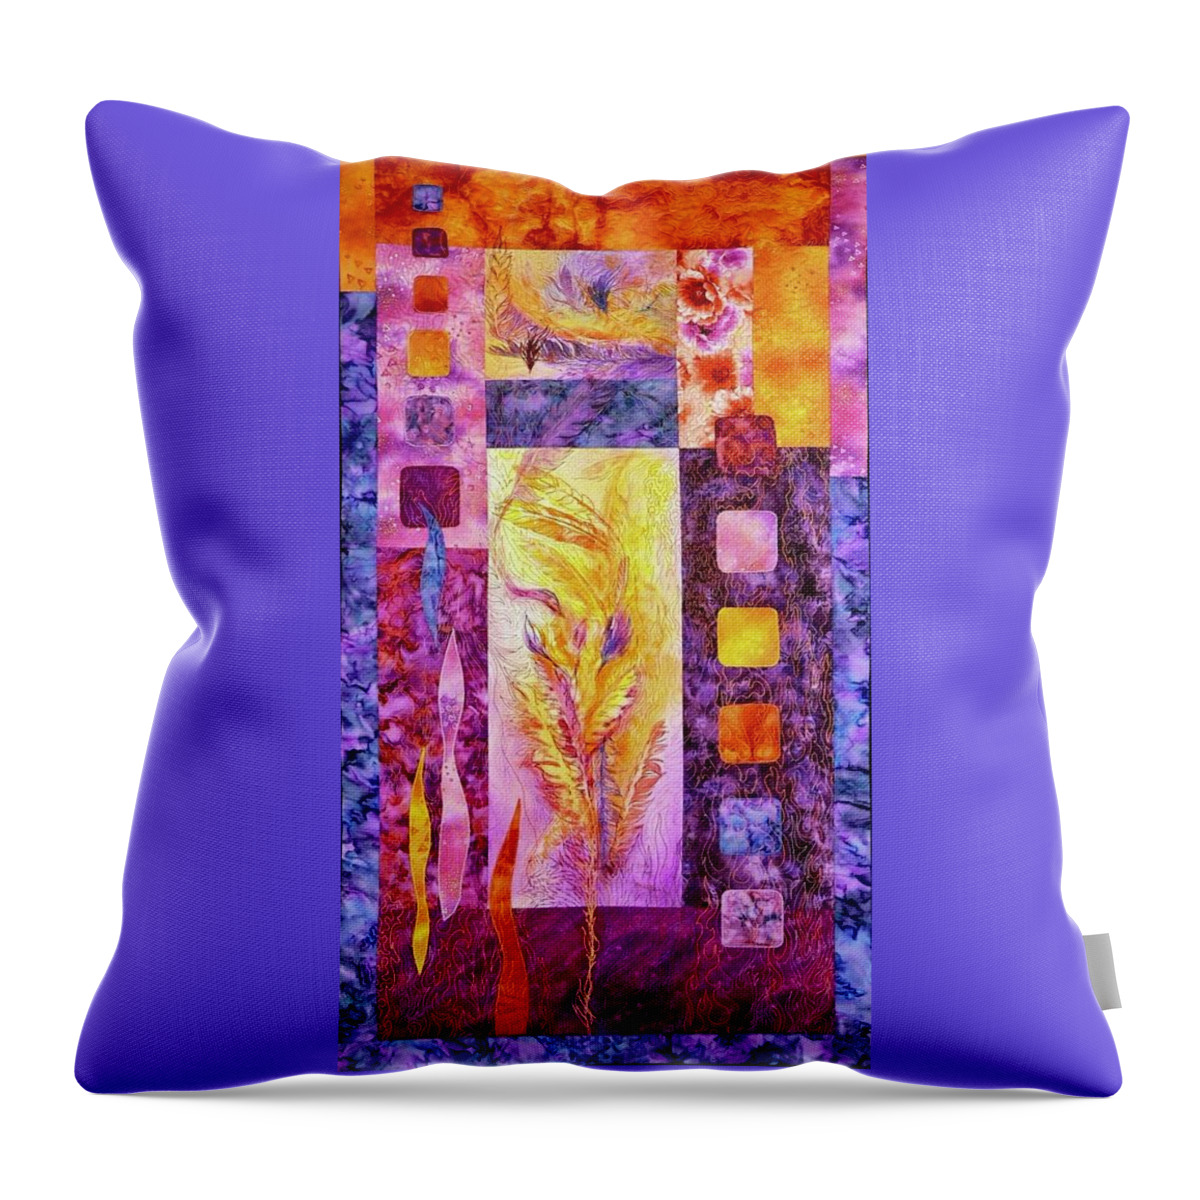 Feathers Printed On Cotton Fabrics Throw Pillow featuring the tapestry - textile Flaming Feathers by Pat Dolan